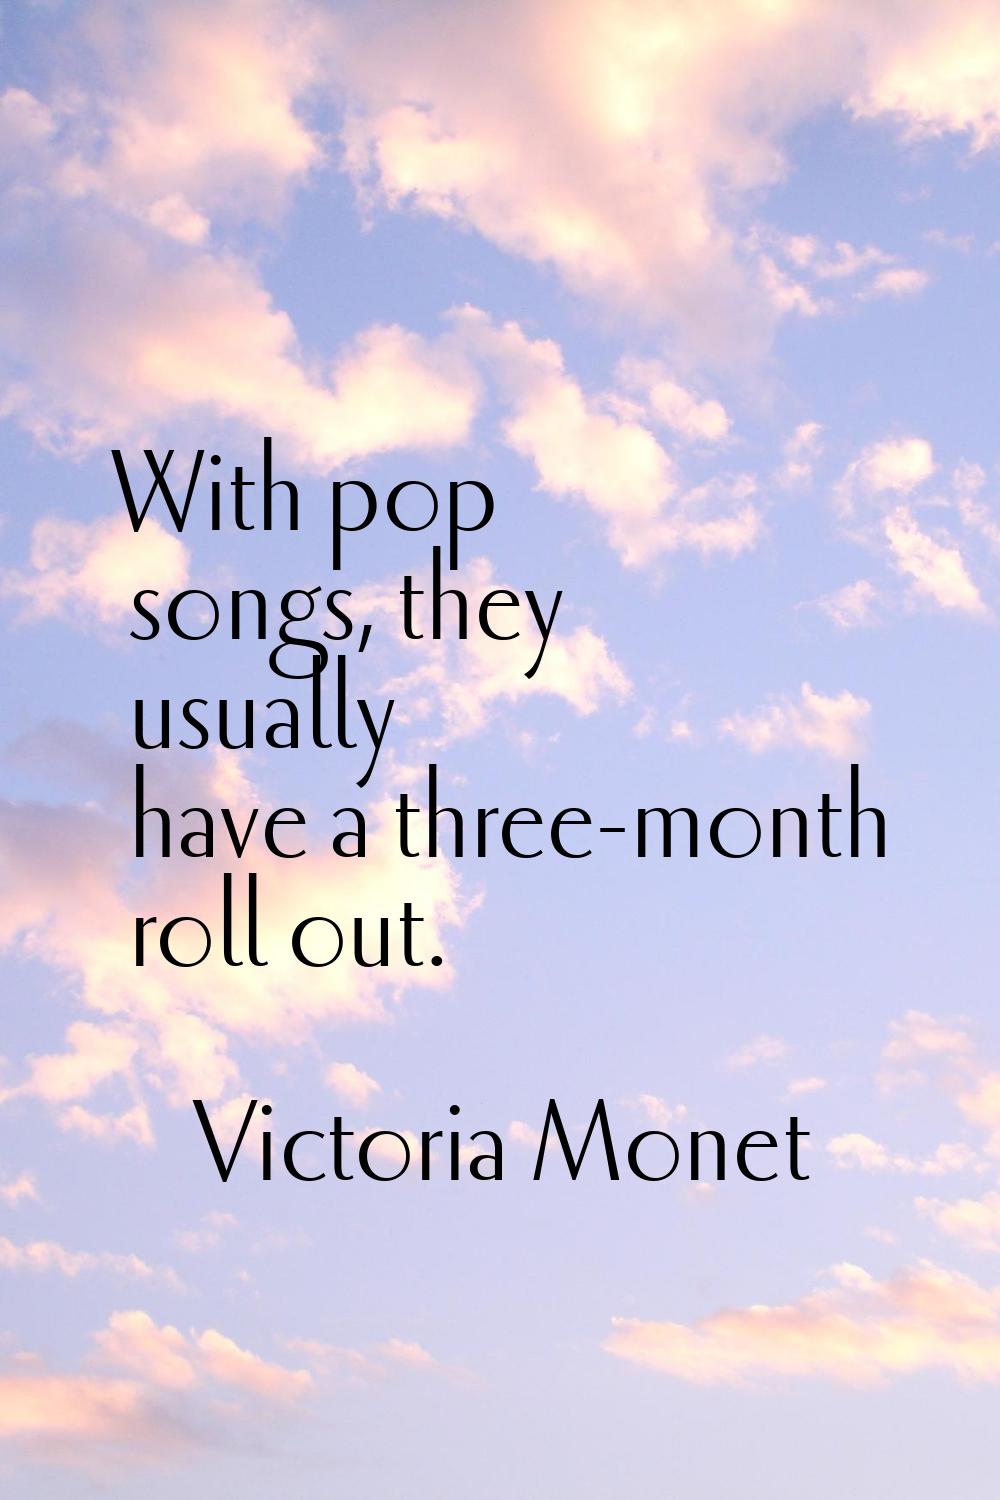 With pop songs, they usually have a three-month roll out.